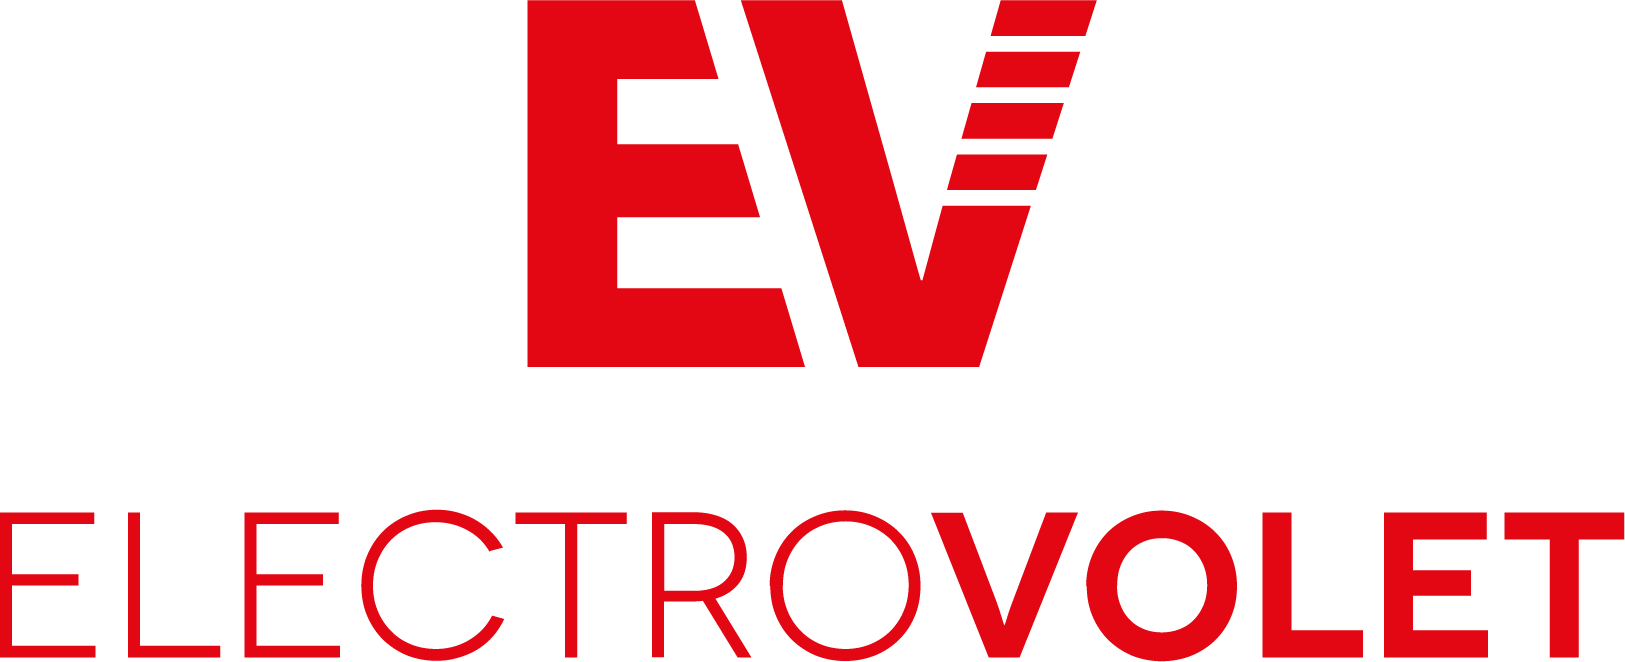 site web electrovolet